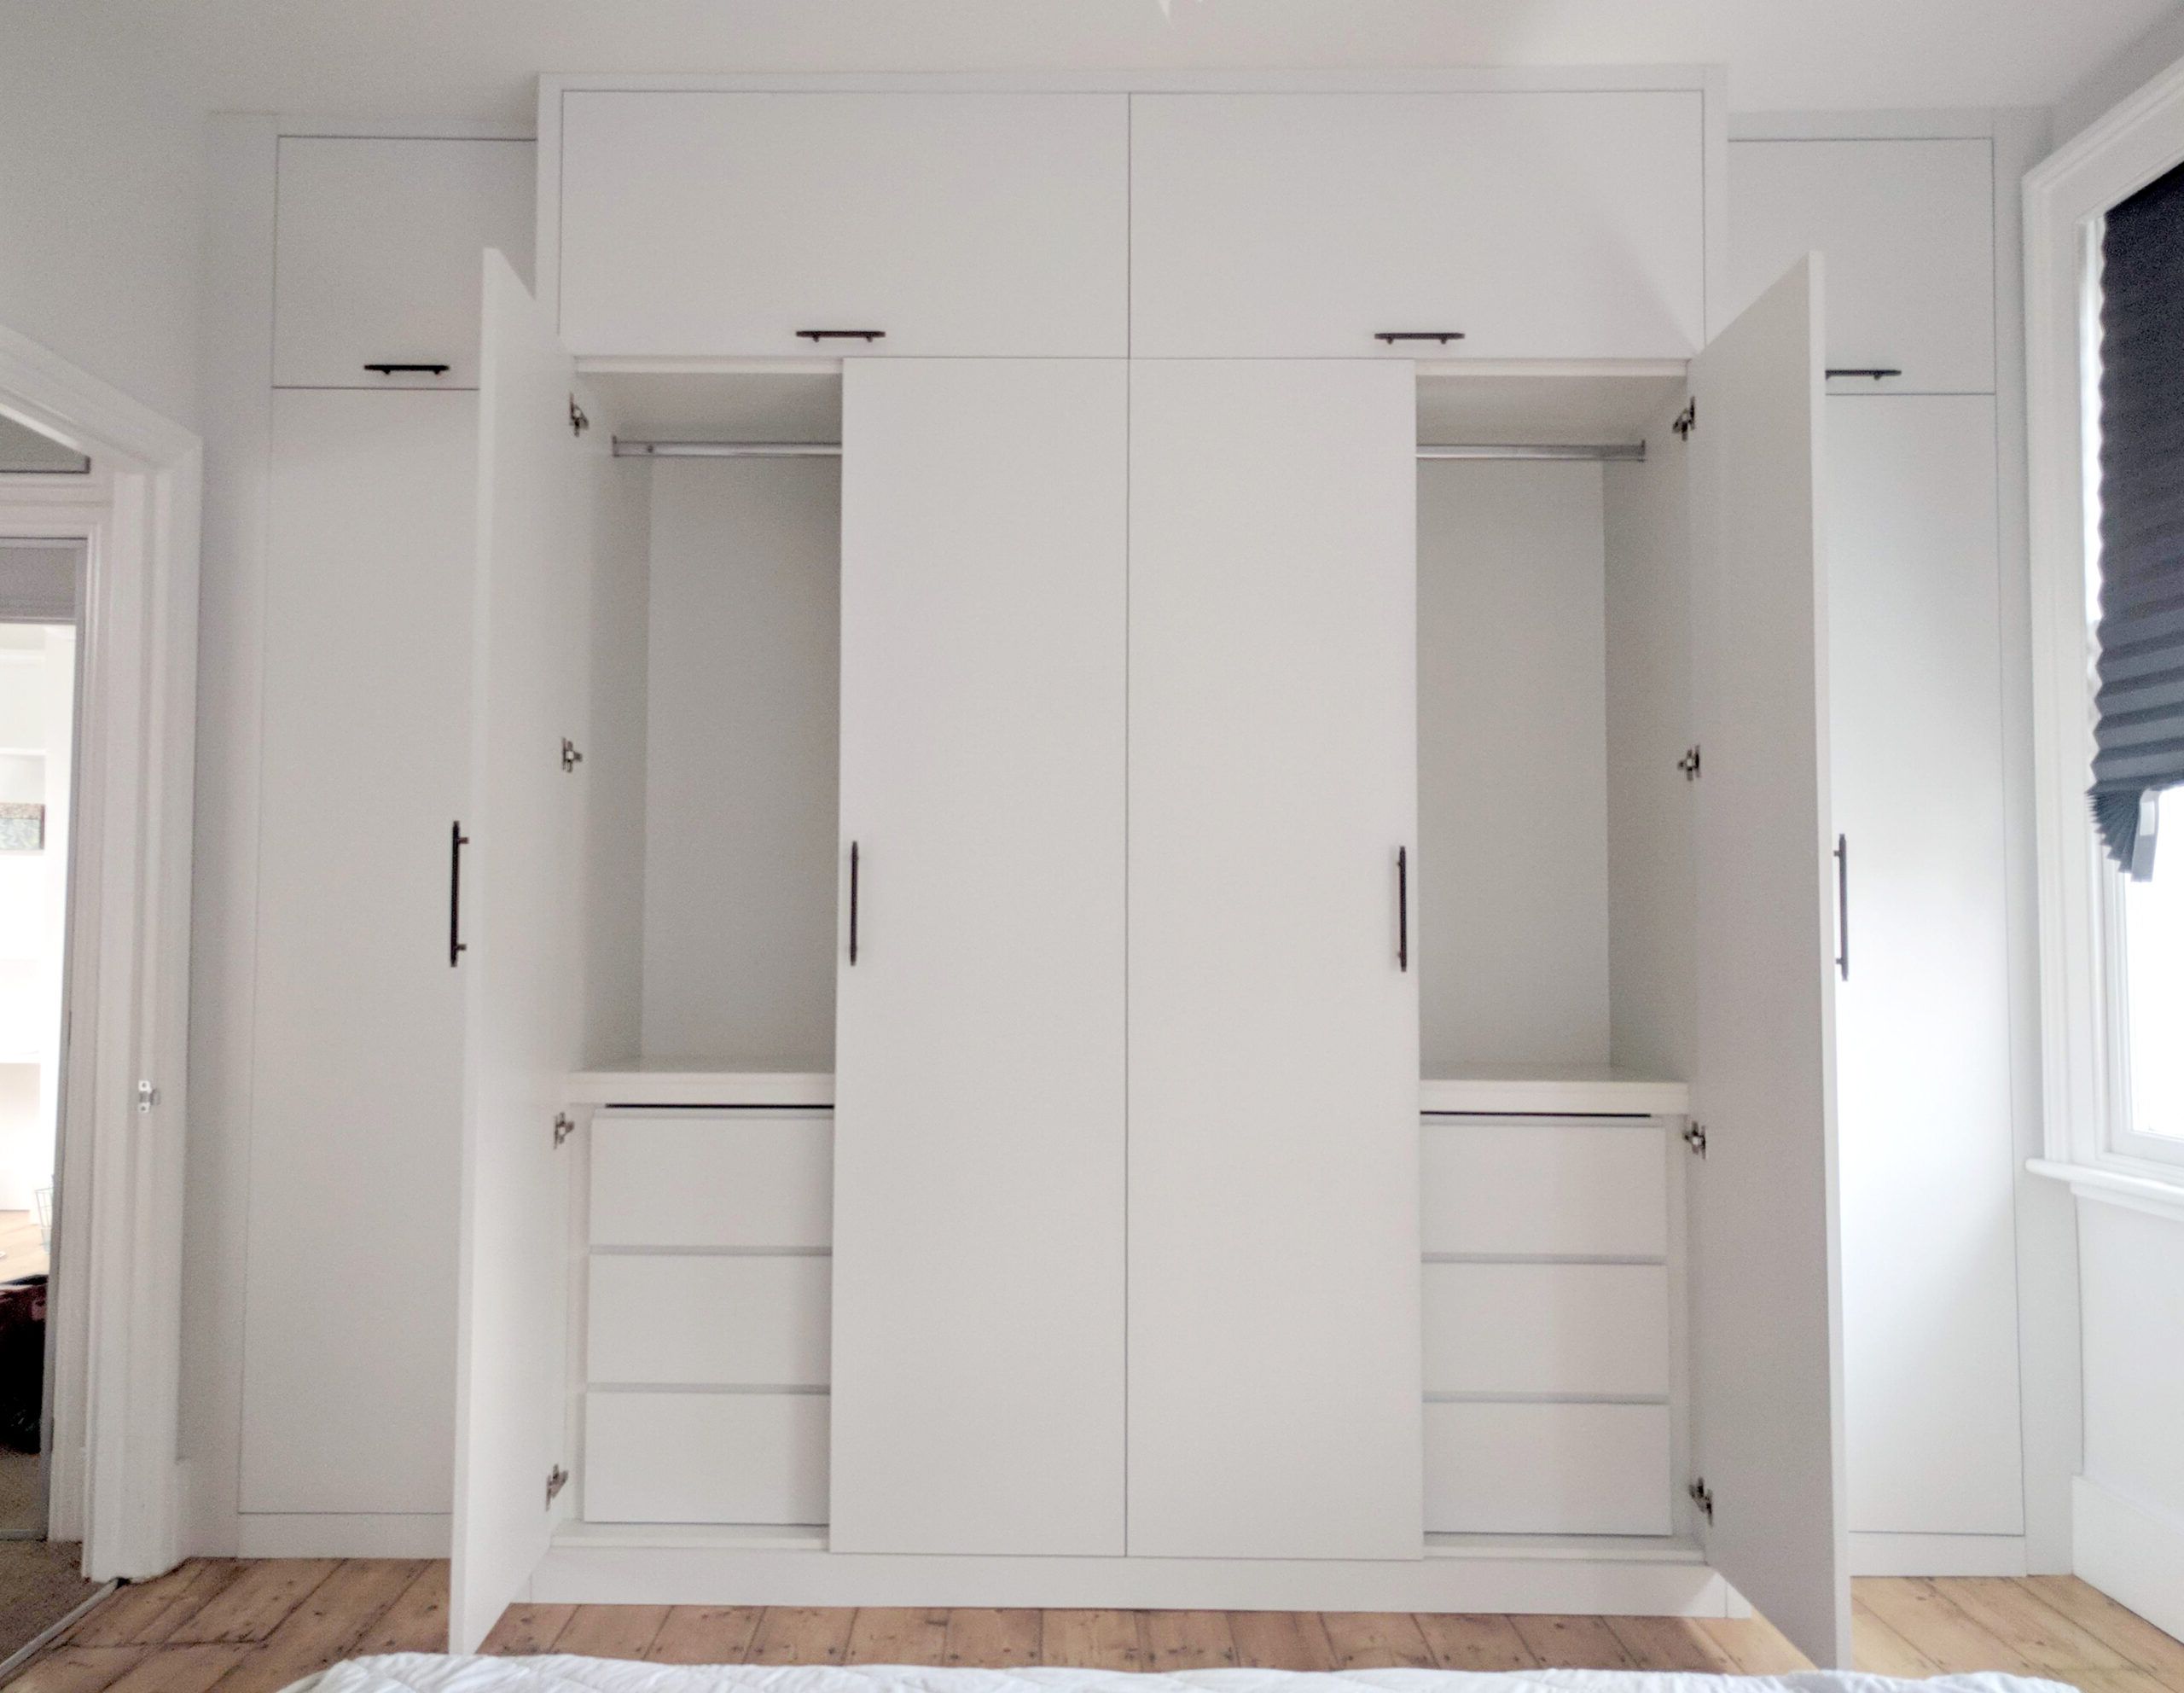 Breakfront Master Bedroom Wardrobe – Cookjoinery With Breakfront Wardrobes (View 16 of 20)